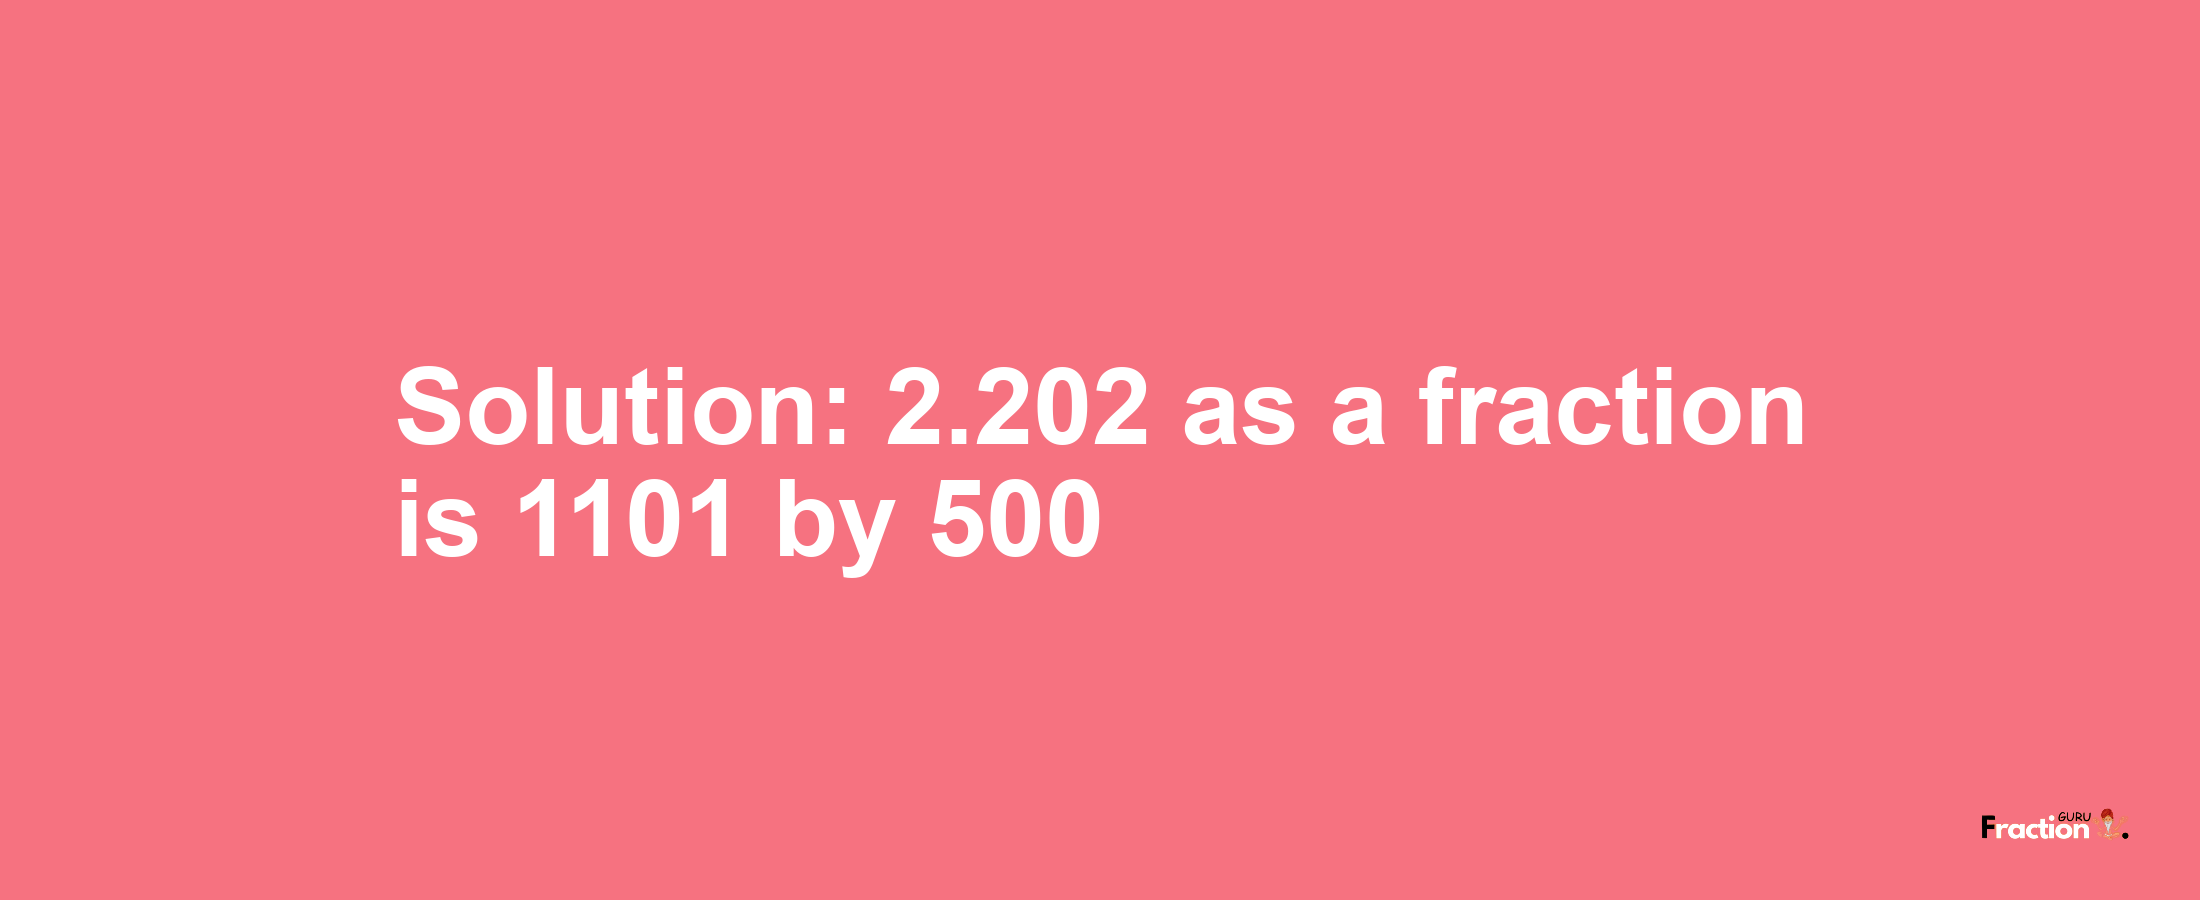 Solution:2.202 as a fraction is 1101/500